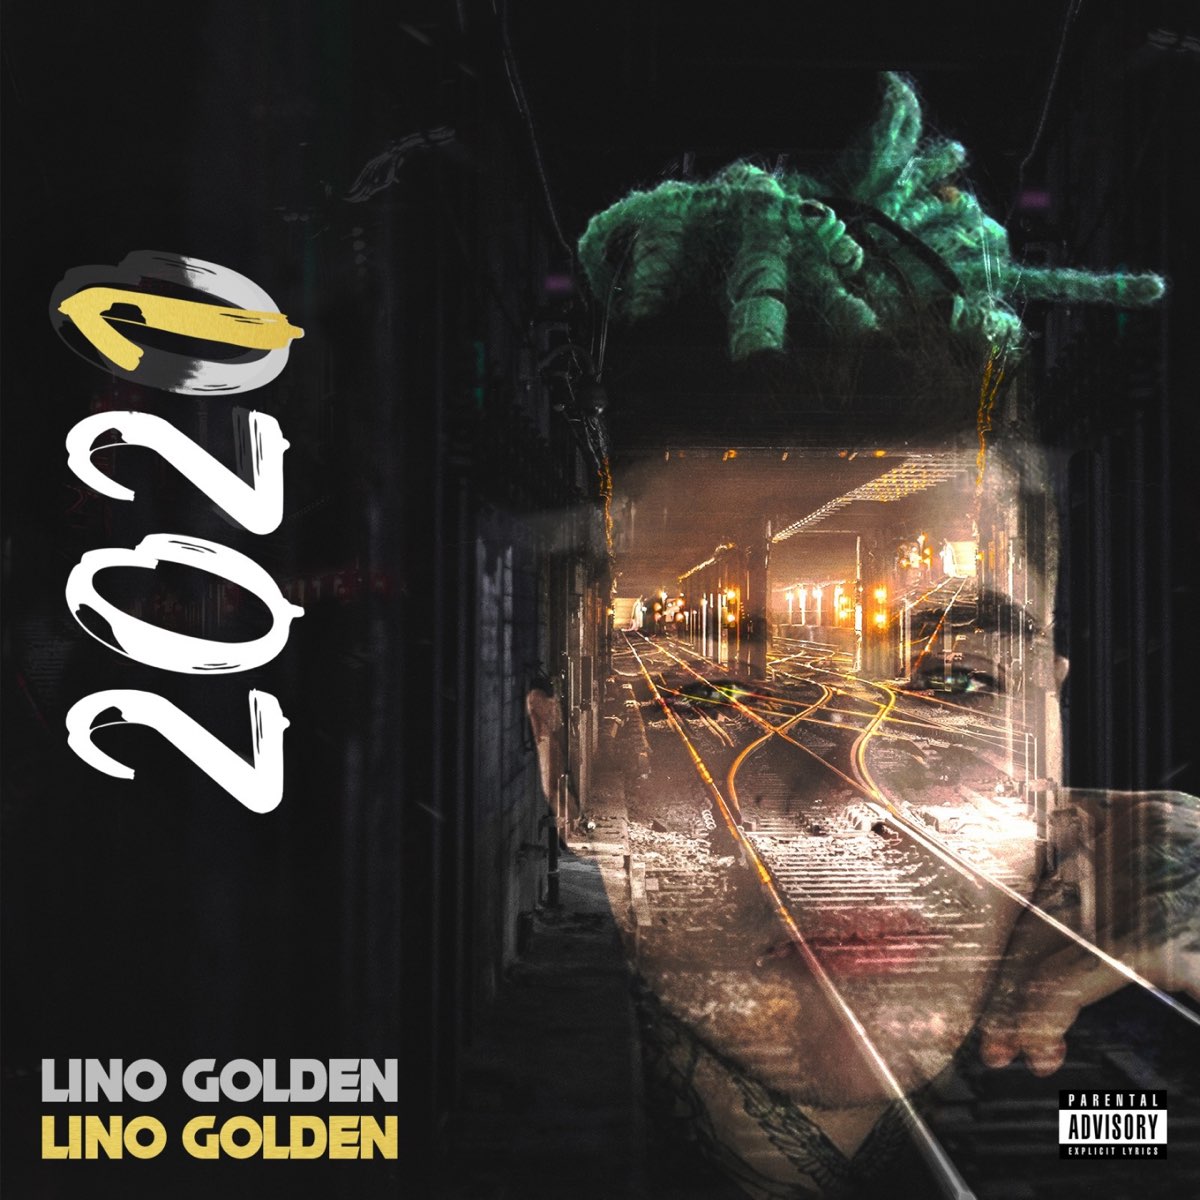 2021 - EP by Lino Golden on Apple Music